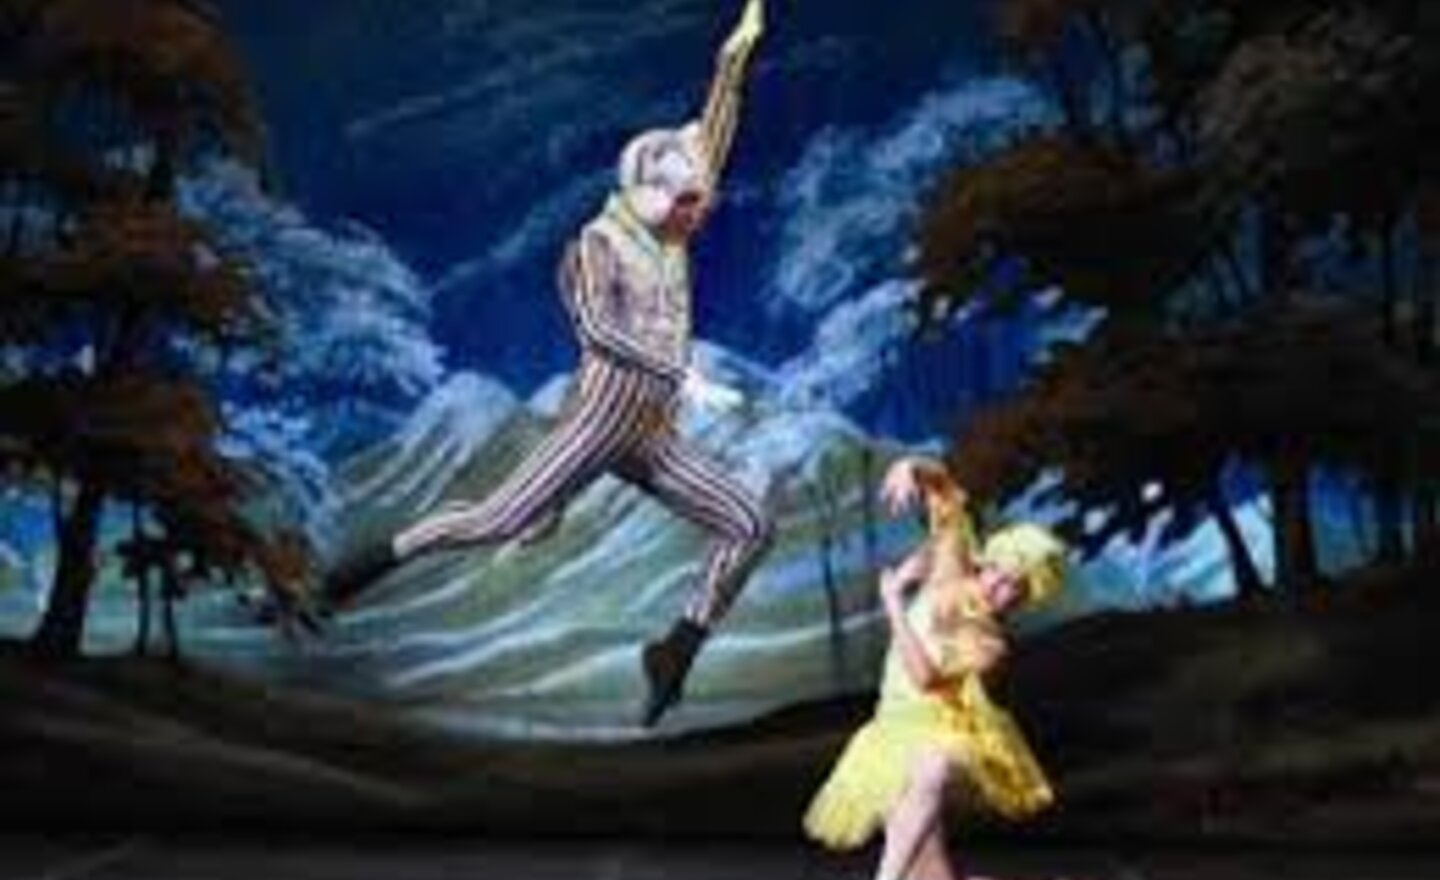 Image of Free streaming ballet performance of Peter and the Wolf